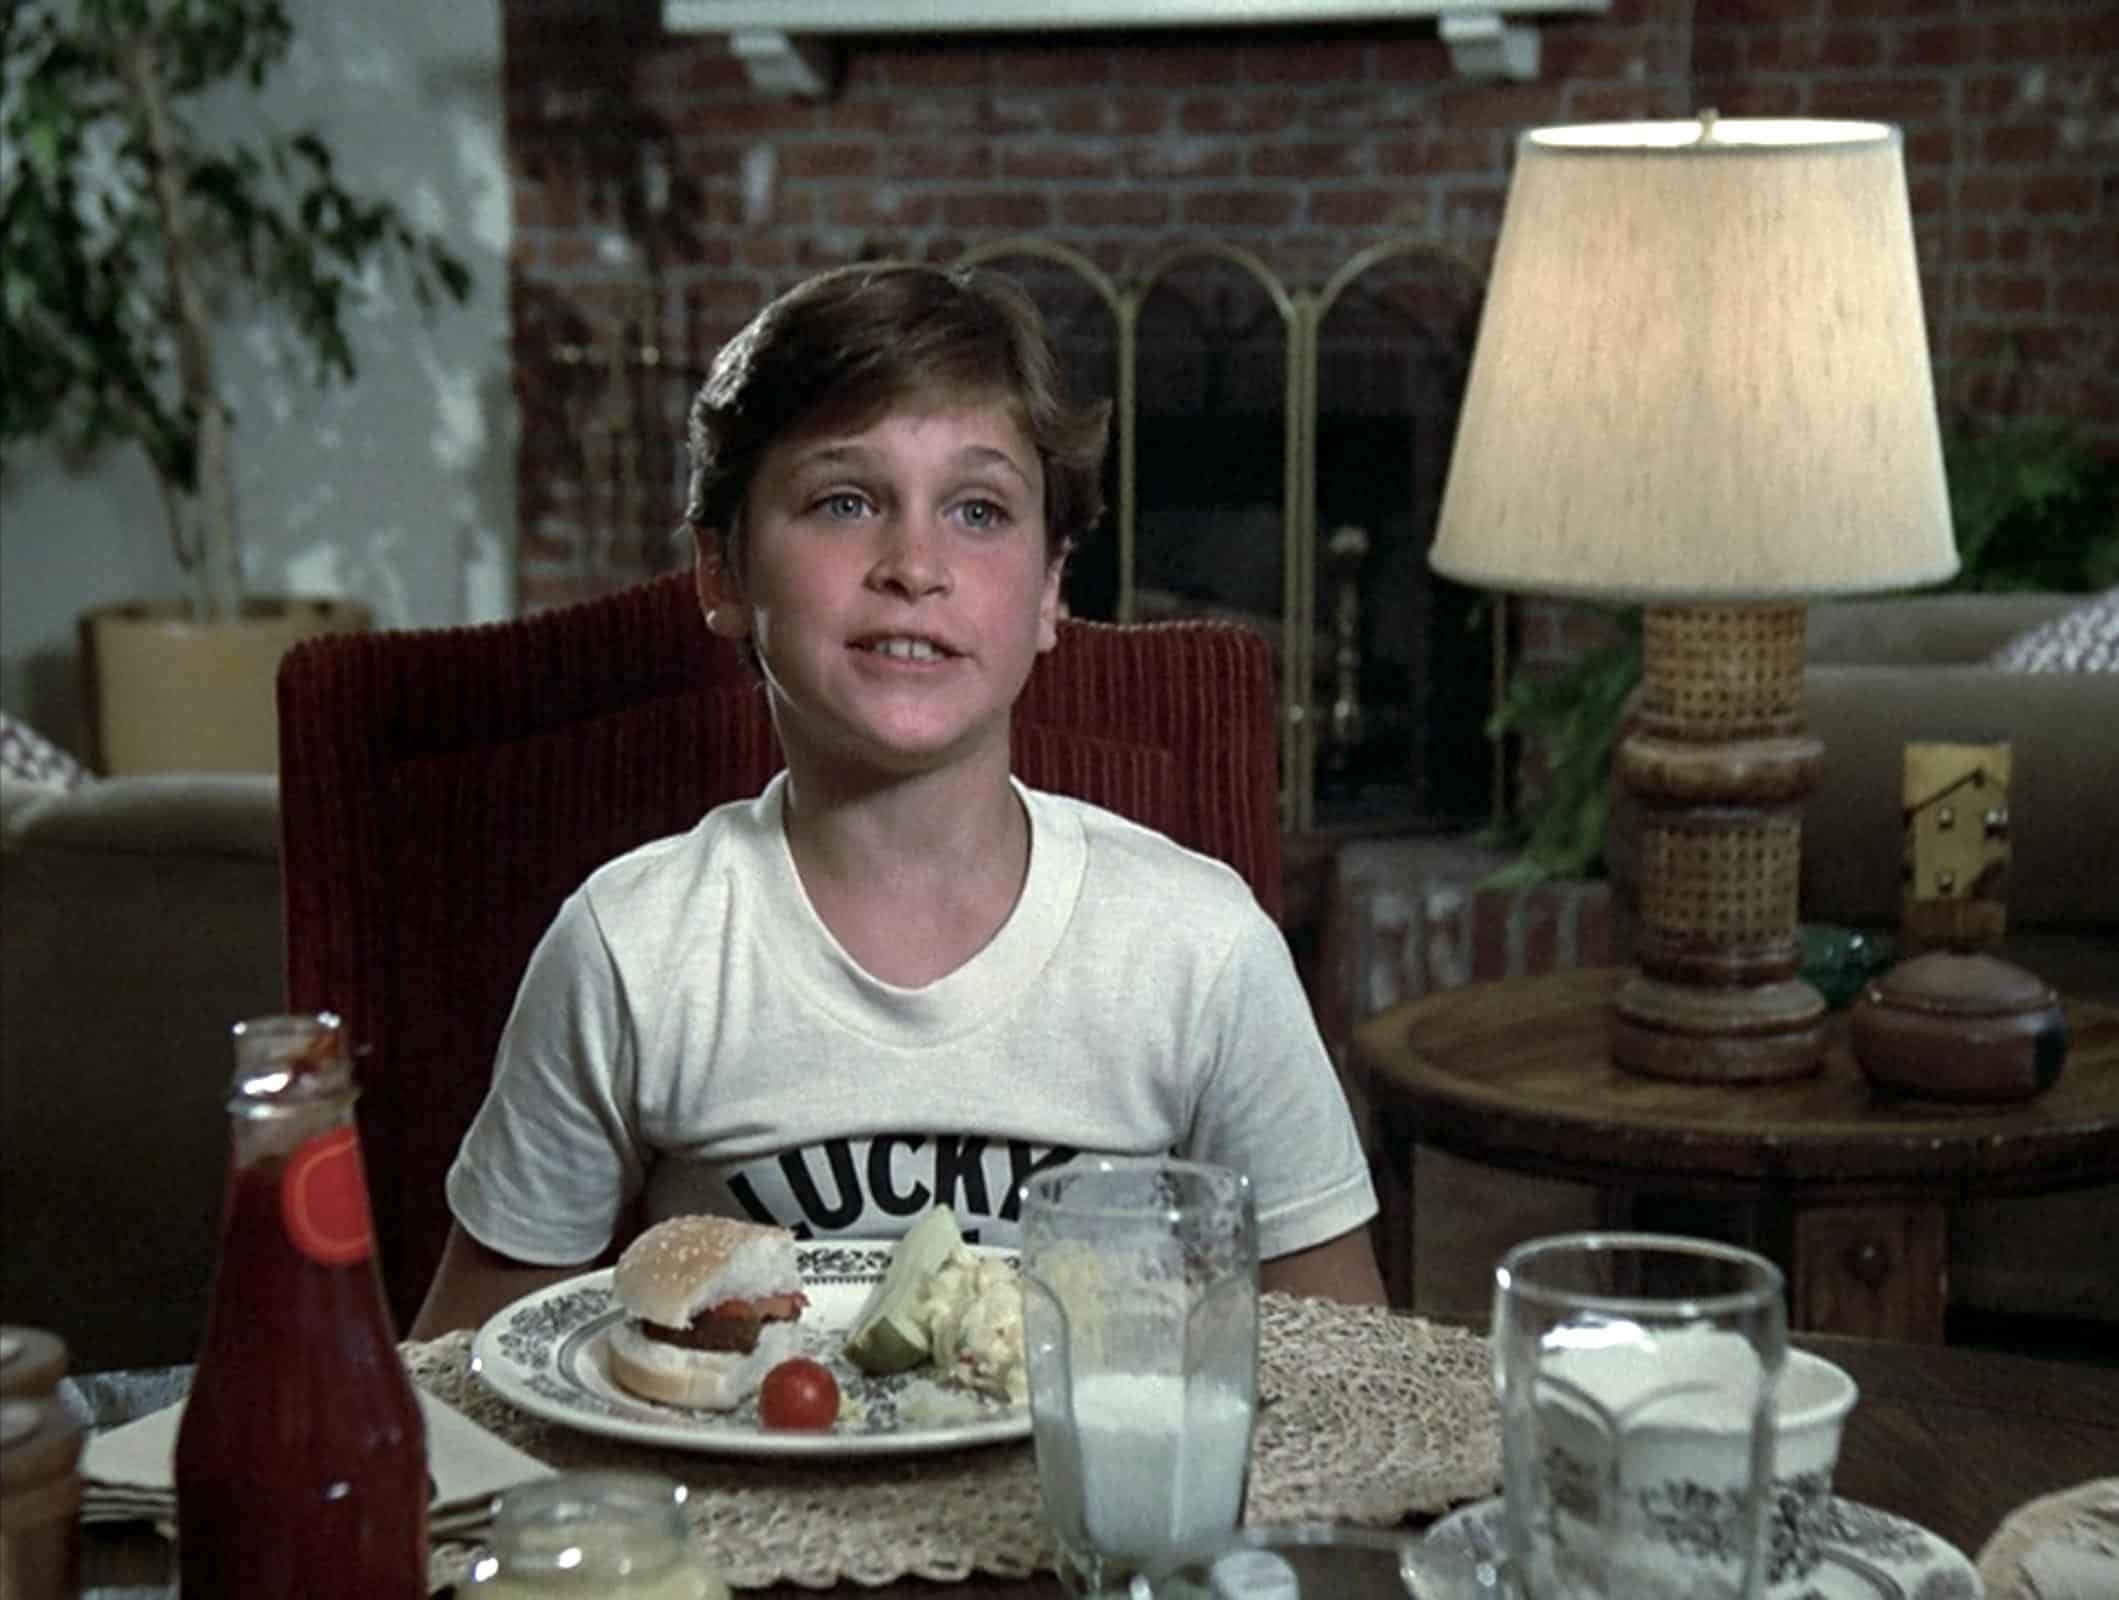 A young Joaquin Phoenix sits at the dining table in this image from Universal Television.